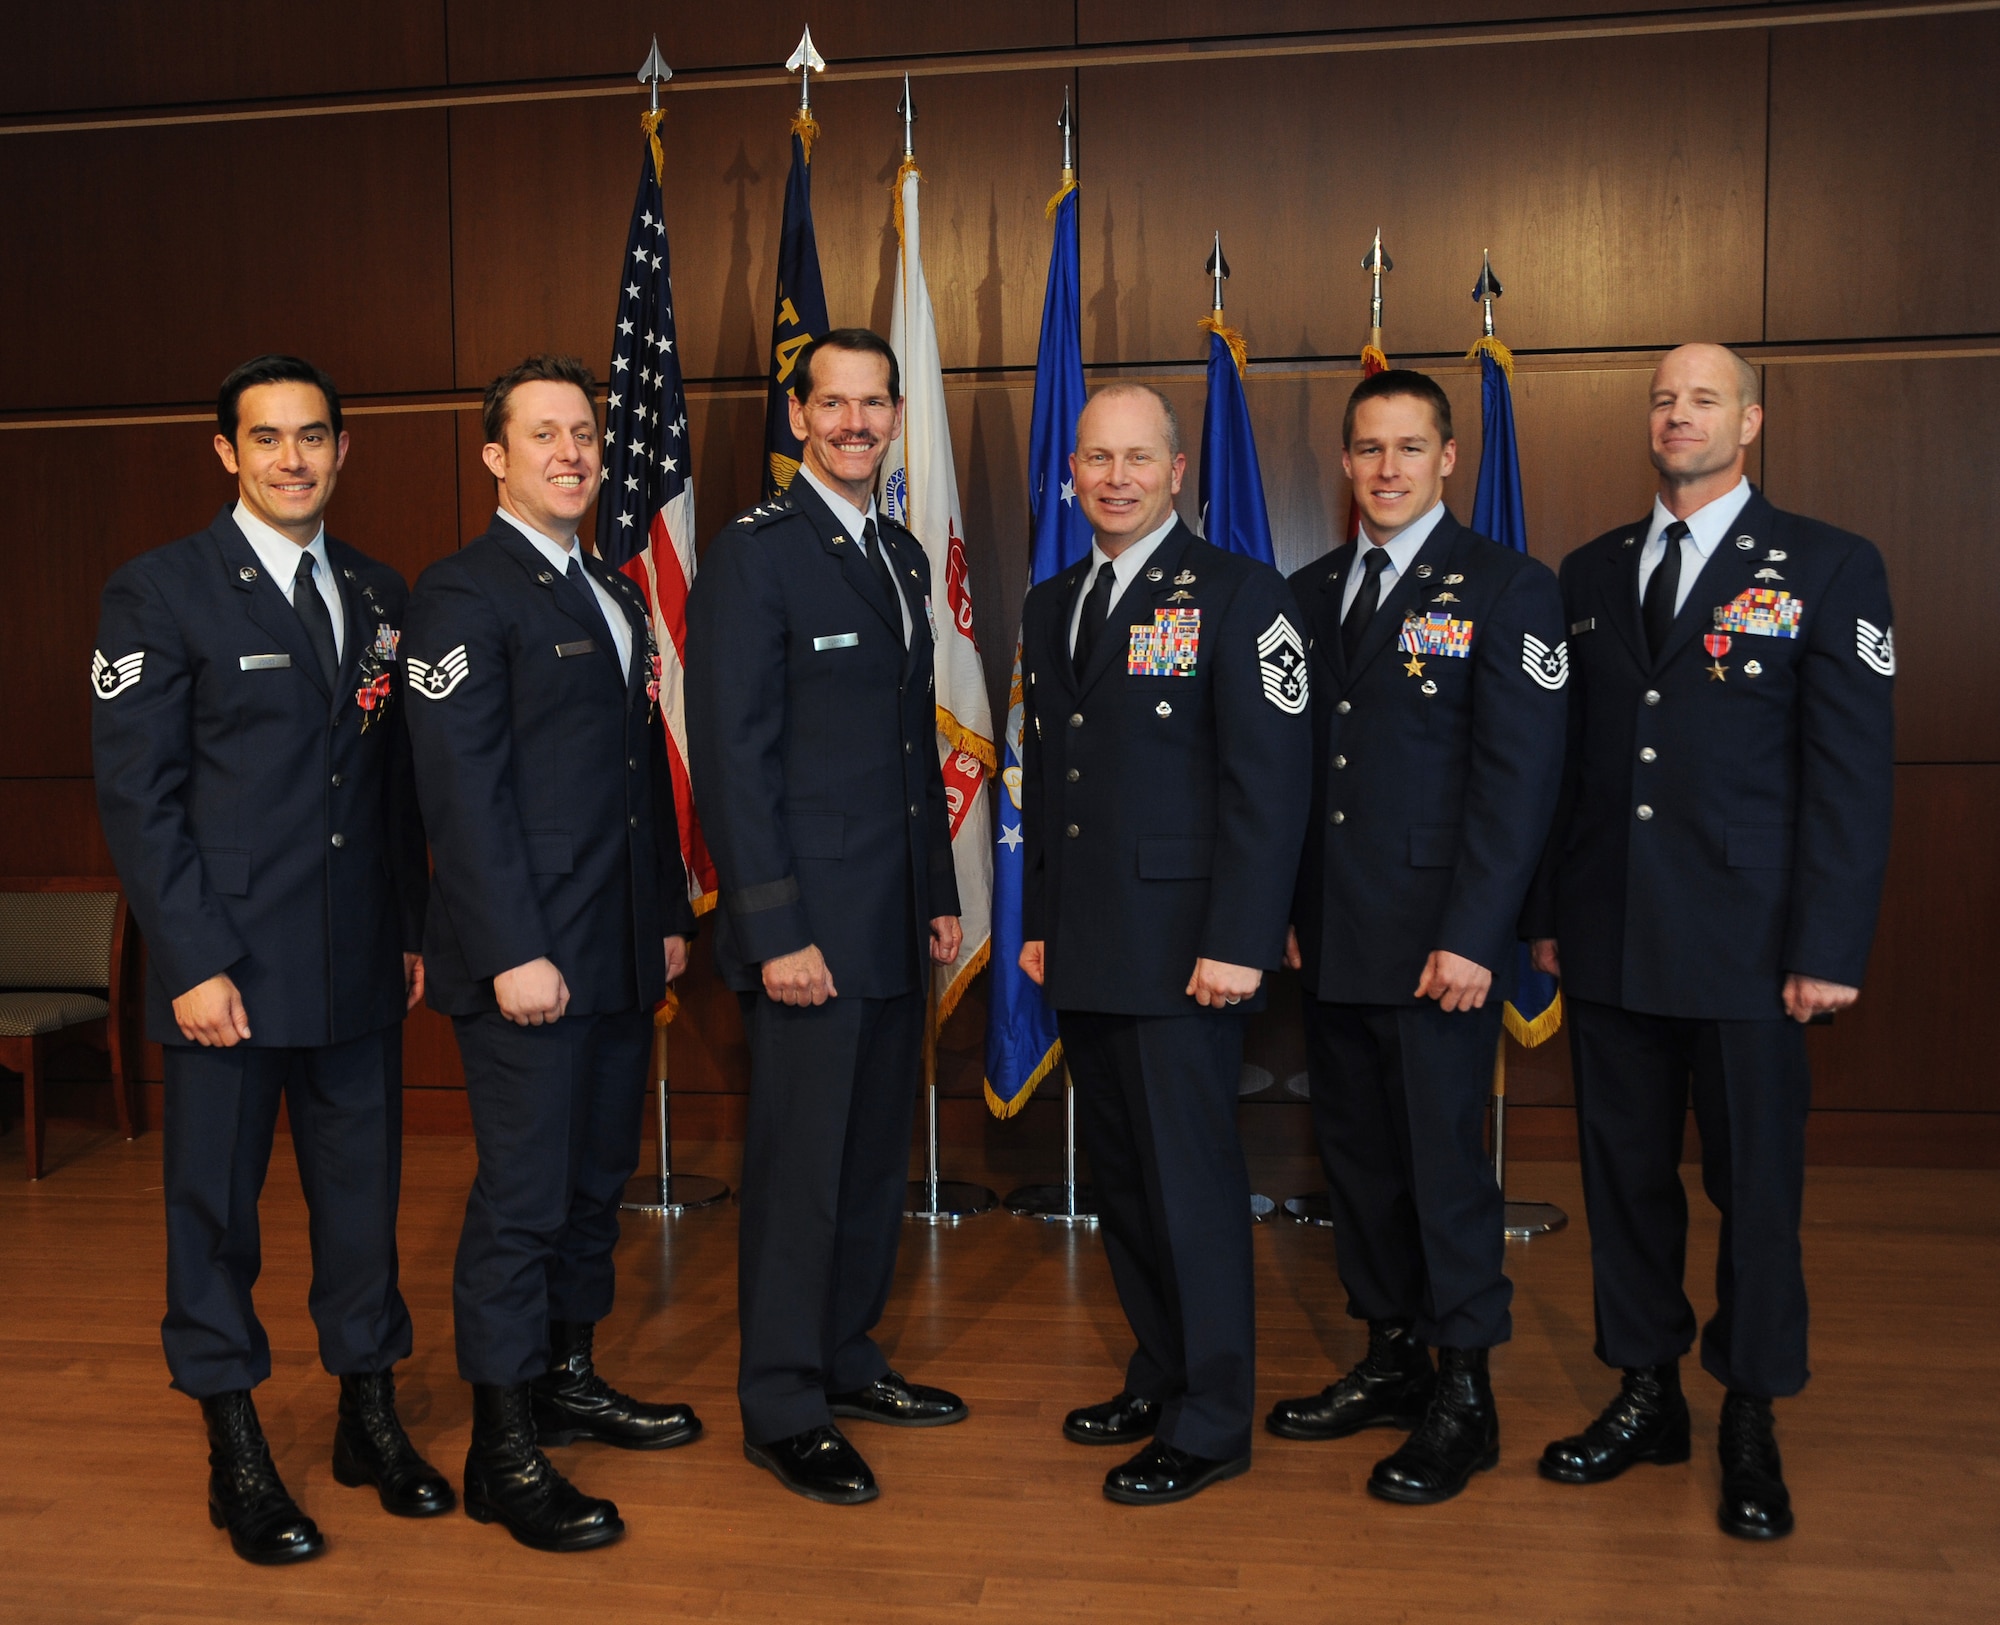 Combat controllers with the Oregon Air National Guard's 125th Special Tactics Squadron assemble for a group photo with Air National Guard Director Lt. Gen. Stanley E. Clarke III (third from left) and Air National Guard Command Chief Master Sergeant James W. Hotaling (center) following an award ceremony, March 24, 2014, at the 41st Infantry Division Armed Forces Reserve Center at Camp Withycombe, in Clackamas, Ore. From left: Staff Sgt. Christopher Jones received the Bronze Star with Valor and first Oak Leaf Cluster; Staff Sgt. Matthew Matlock received the Bronze Star Medal with Valor and second Oak Leaf Cluster; Lt. Gen. Stanley Clarke; Chief Master Sergeant James Hotaling (a former Oregon Air Guard 125th STS member); Tech. Sgt. Doug Matthews received the rarely awarded Silver Star; and Tech. Sgt. George Thompson received the Bronze Star. (U.S. Air National Guard photo by Tech. Sgt. John Hughel, 142nd Fighter Wing Public Affairs/Released) 